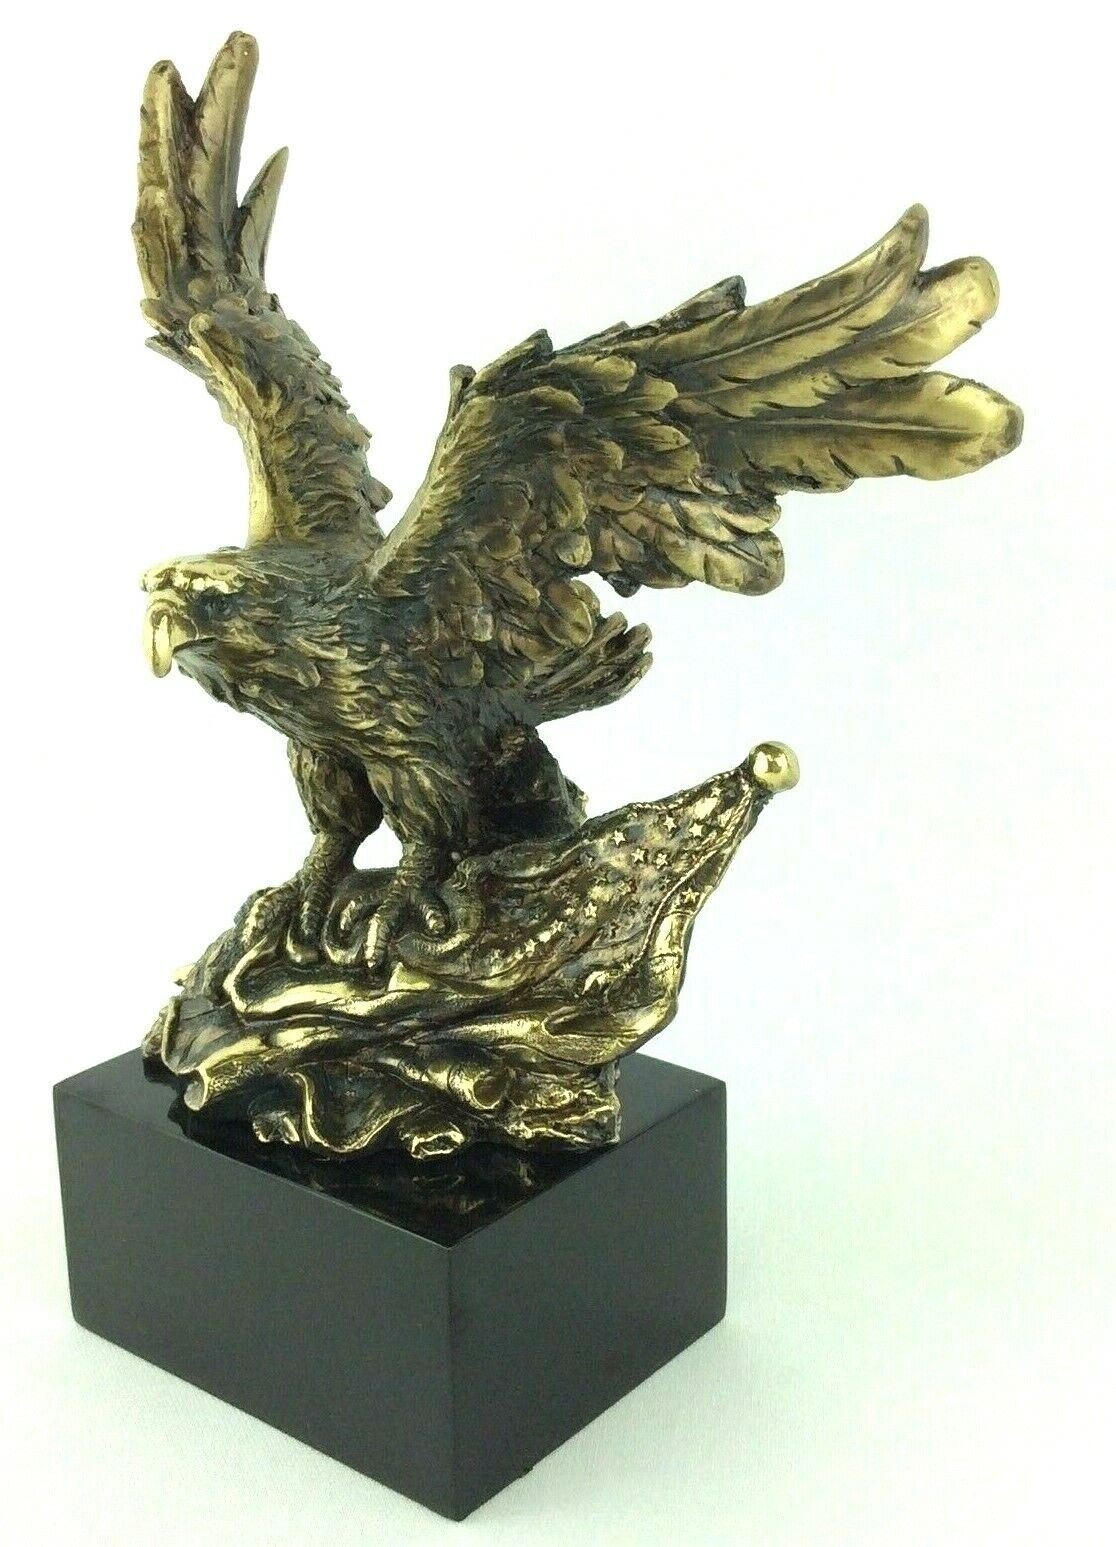 Soaring Eagle Clutching American Flag Figurine Gold Resin Finish New